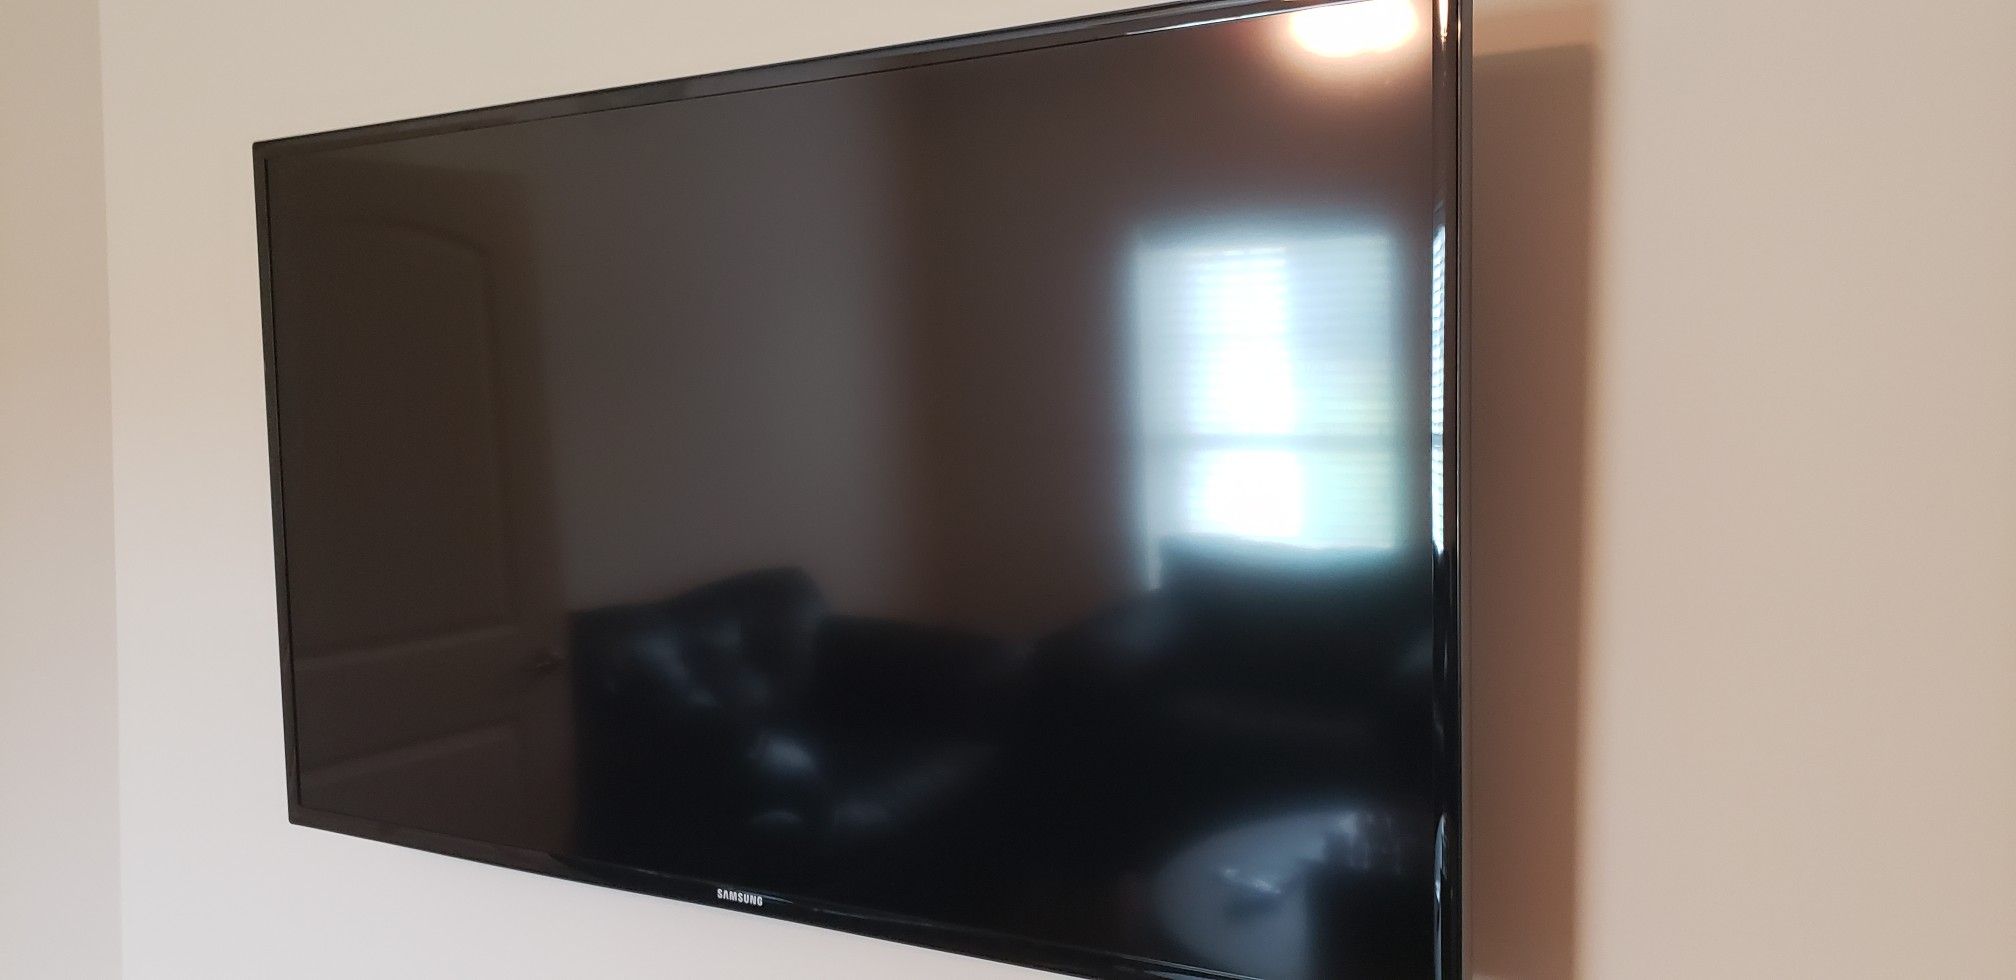 Samsung 50" TVs - Two available